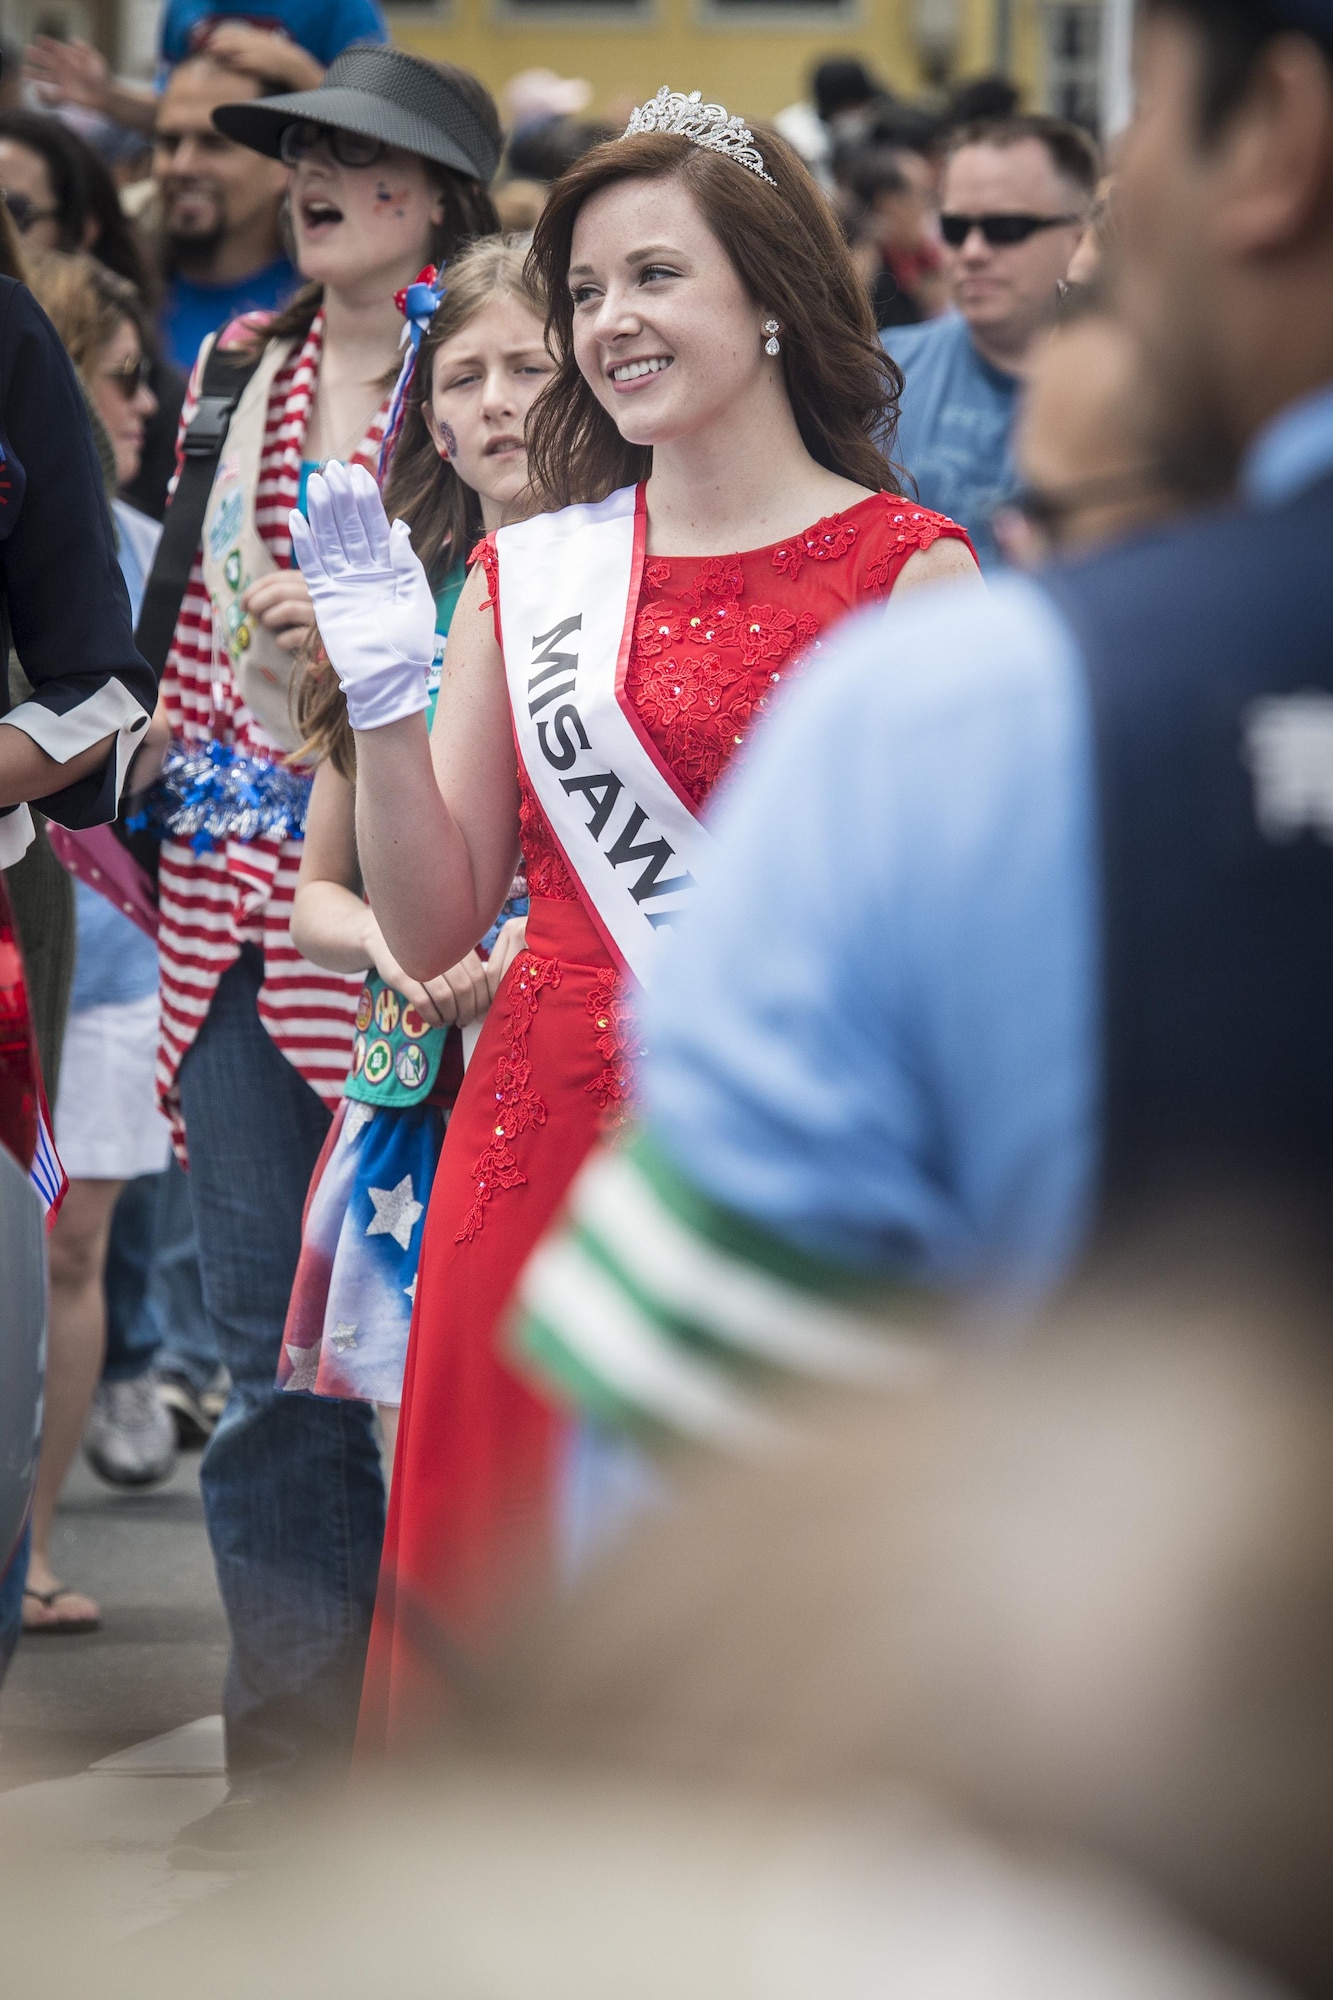 U.S. Air Force Senior Airman Taryn Mendoza, the 28th Annual American Day queen and an allergy and immunization technicians with the 35th Medical Operations Squadron, smiles and waves as she walks by attendees during the parade in Misawa City, Japan, June 5, 2016. More than 80,000 attendees from across the Aomori Prefecture traveled to Misawa City to enjoy American and Japanese culture. Serving as the American Day queen is a two-year honor requiring applicants to compete in numerous events testing their merit and propensity as a queen. Mendoza said she’s truly humbled to have been a part of the event. She hails from Pocatello, Idaho. (U.S. Air Force photo by Staff Sgt. Benjamin W. Stratton)